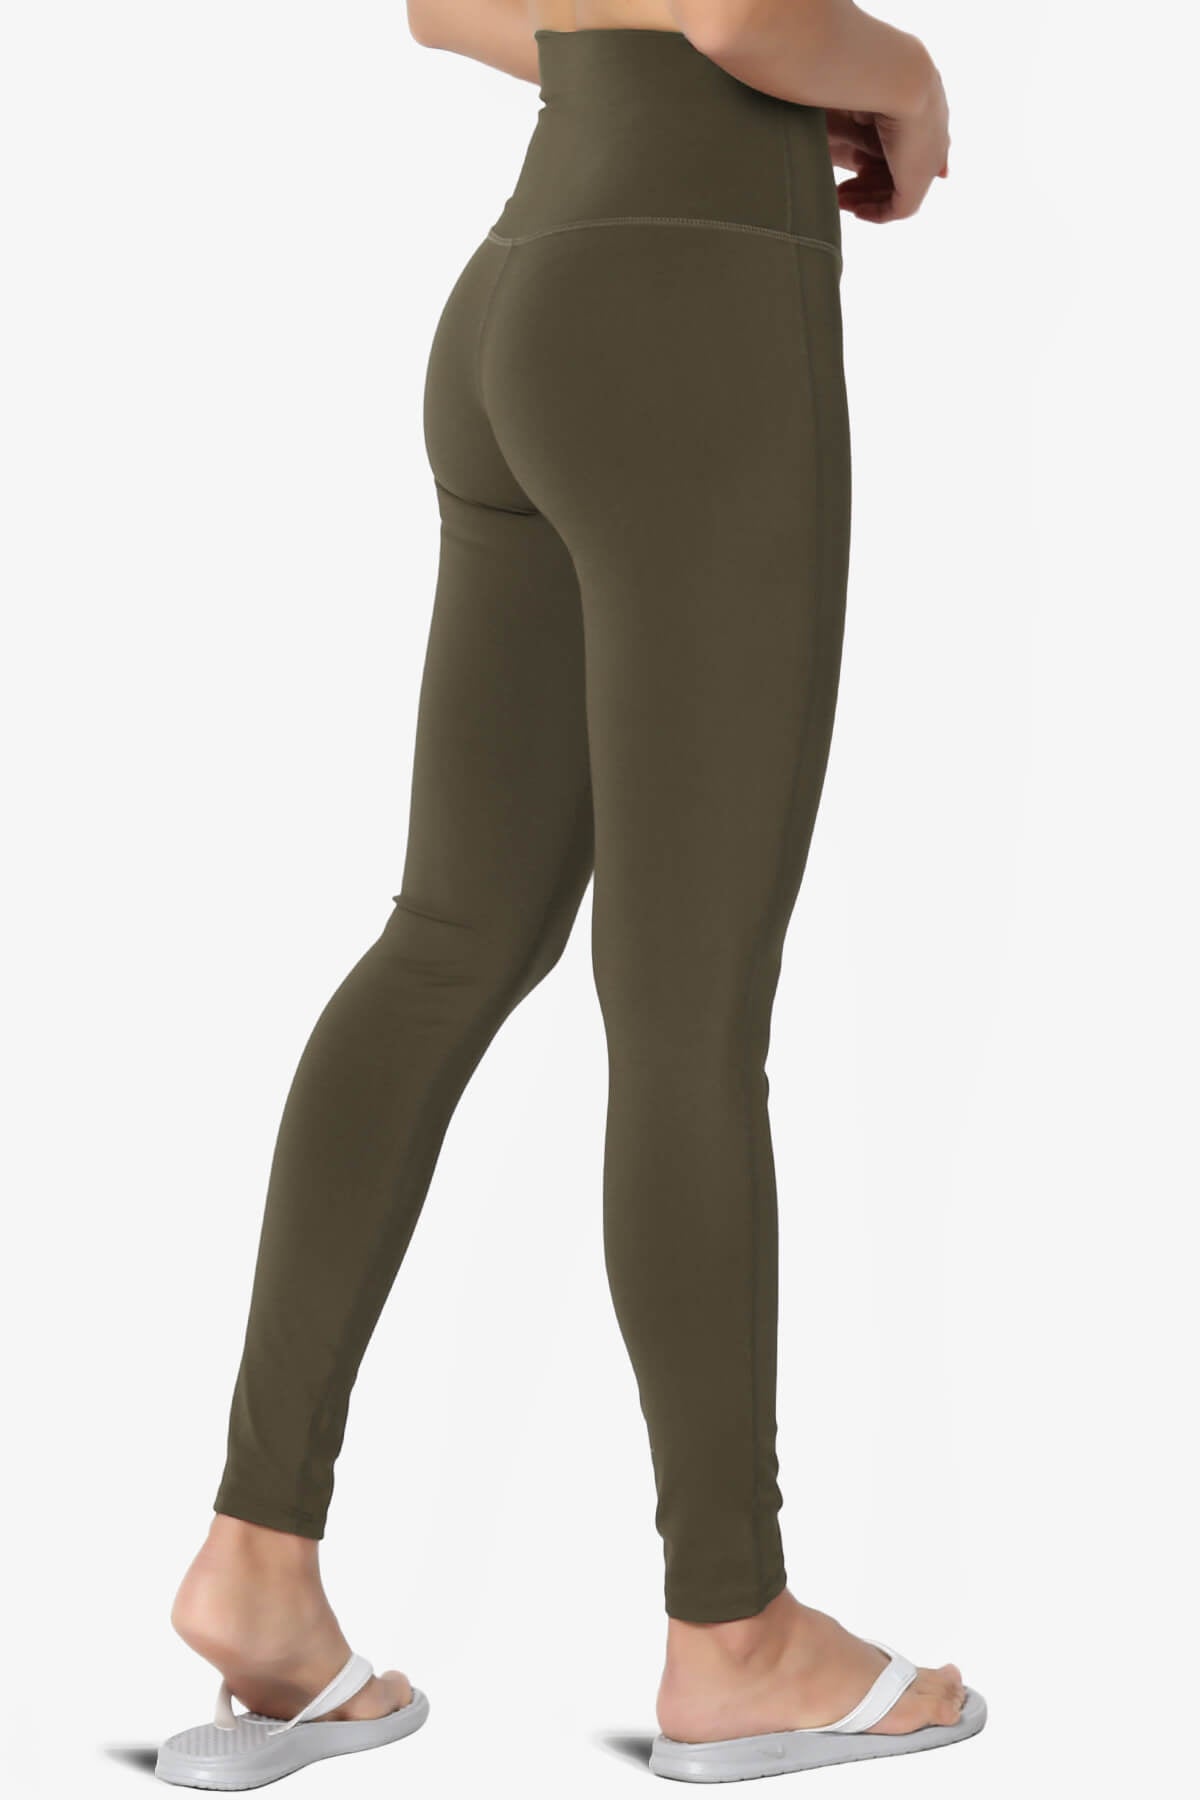 Mosco Athletic High Rise Ankle Leggings OLIVE_1